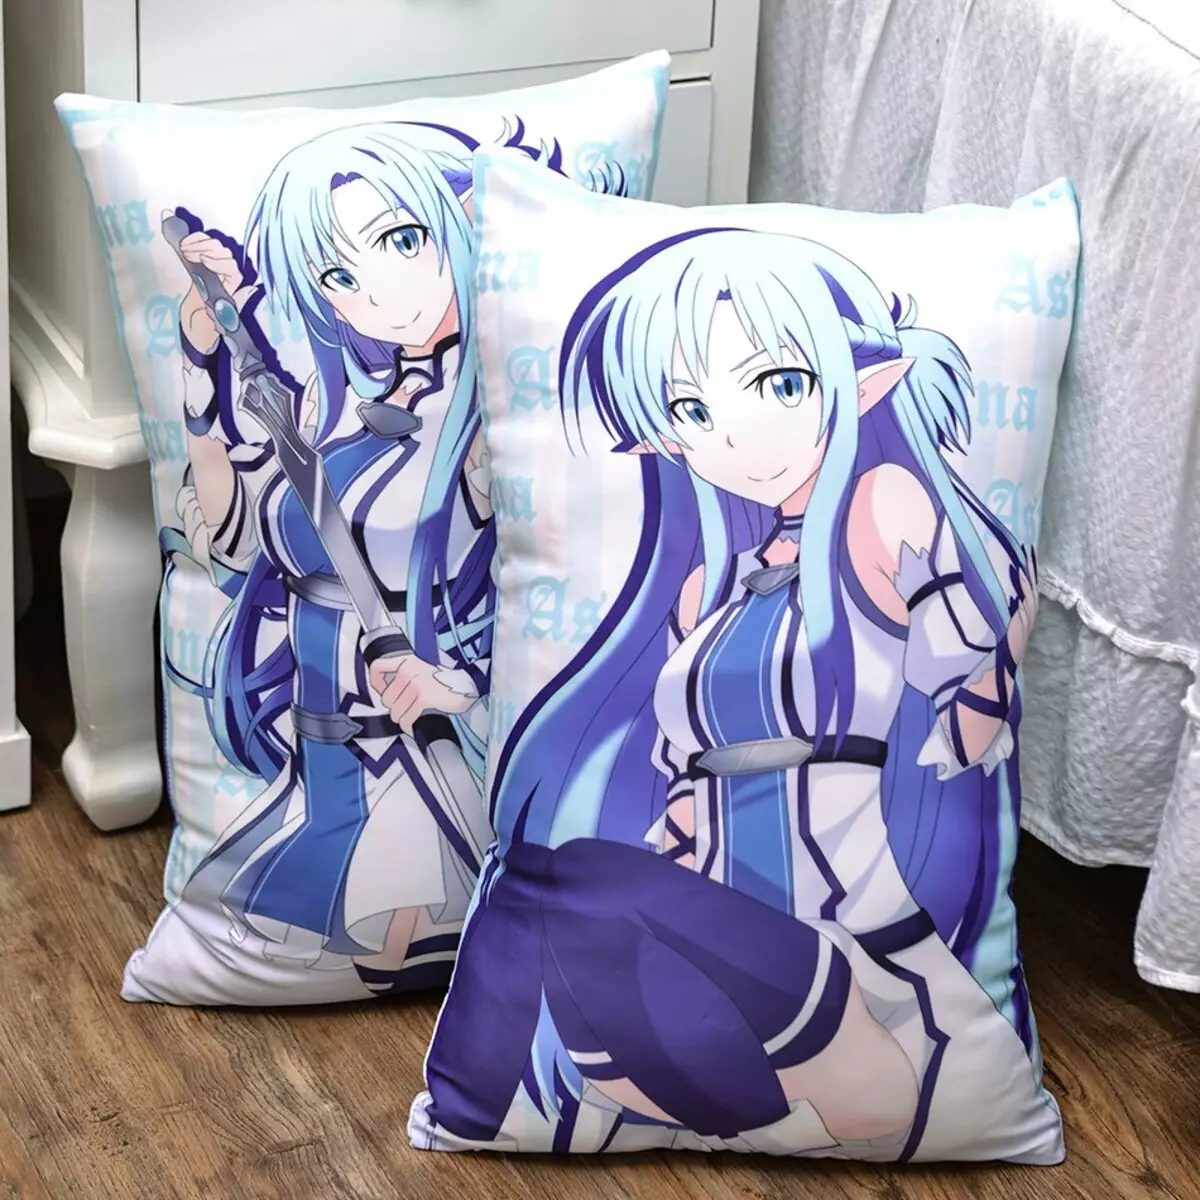 Anime-pillows: Dakimakur hug in full length, long big pillows with a print of girls and other characters 20757_11